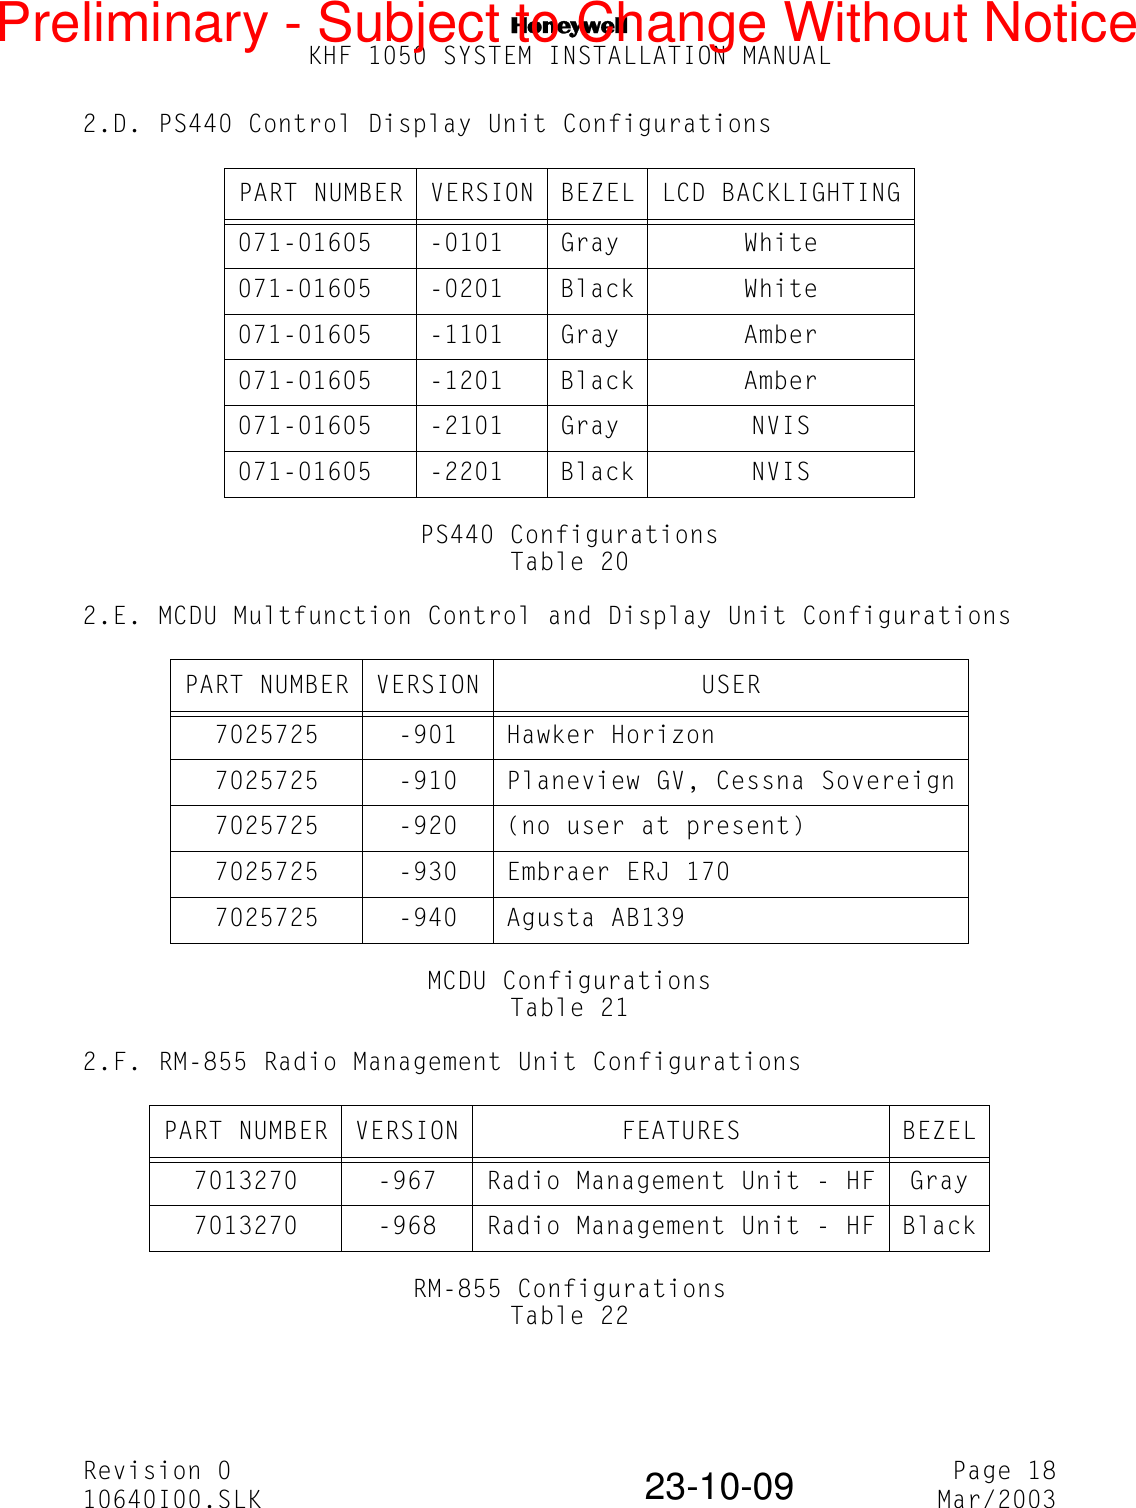 NKHF 1050 SYSTEM INSTALLATION MANUALRevision 0 Page 1810640I00.SLK Mar/200323-10-092.D. PS440 Control Display Unit ConfigurationsPS440 ConfigurationsTable 202.E. MCDU Multfunction Control and Display Unit ConfigurationsMCDU ConfigurationsTable 212.F. RM-855 Radio Management Unit ConfigurationsRM-855 ConfigurationsTable 22PART NUMBER VERSION BEZEL LCD BACKLIGHTING071-01605 -0101 Gray White071-01605 -0201 Black White071-01605 -1101 Gray Amber071-01605 -1201 Black Amber071-01605 -2101 Gray NVIS071-01605 -2201 Black NVISPART NUMBER VERSION USER7025725 -901 Hawker Horizon7025725 -910 Planeview GV, Cessna Sovereign7025725 -920 (no user at present)7025725 -930 Embraer ERJ 1707025725 -940 Agusta AB139PART NUMBER VERSION FEATURES BEZEL7013270 -967 Radio Management Unit - HF Gray7013270 -968 Radio Management Unit - HF BlackPreliminary - Subject to Change Without Notice